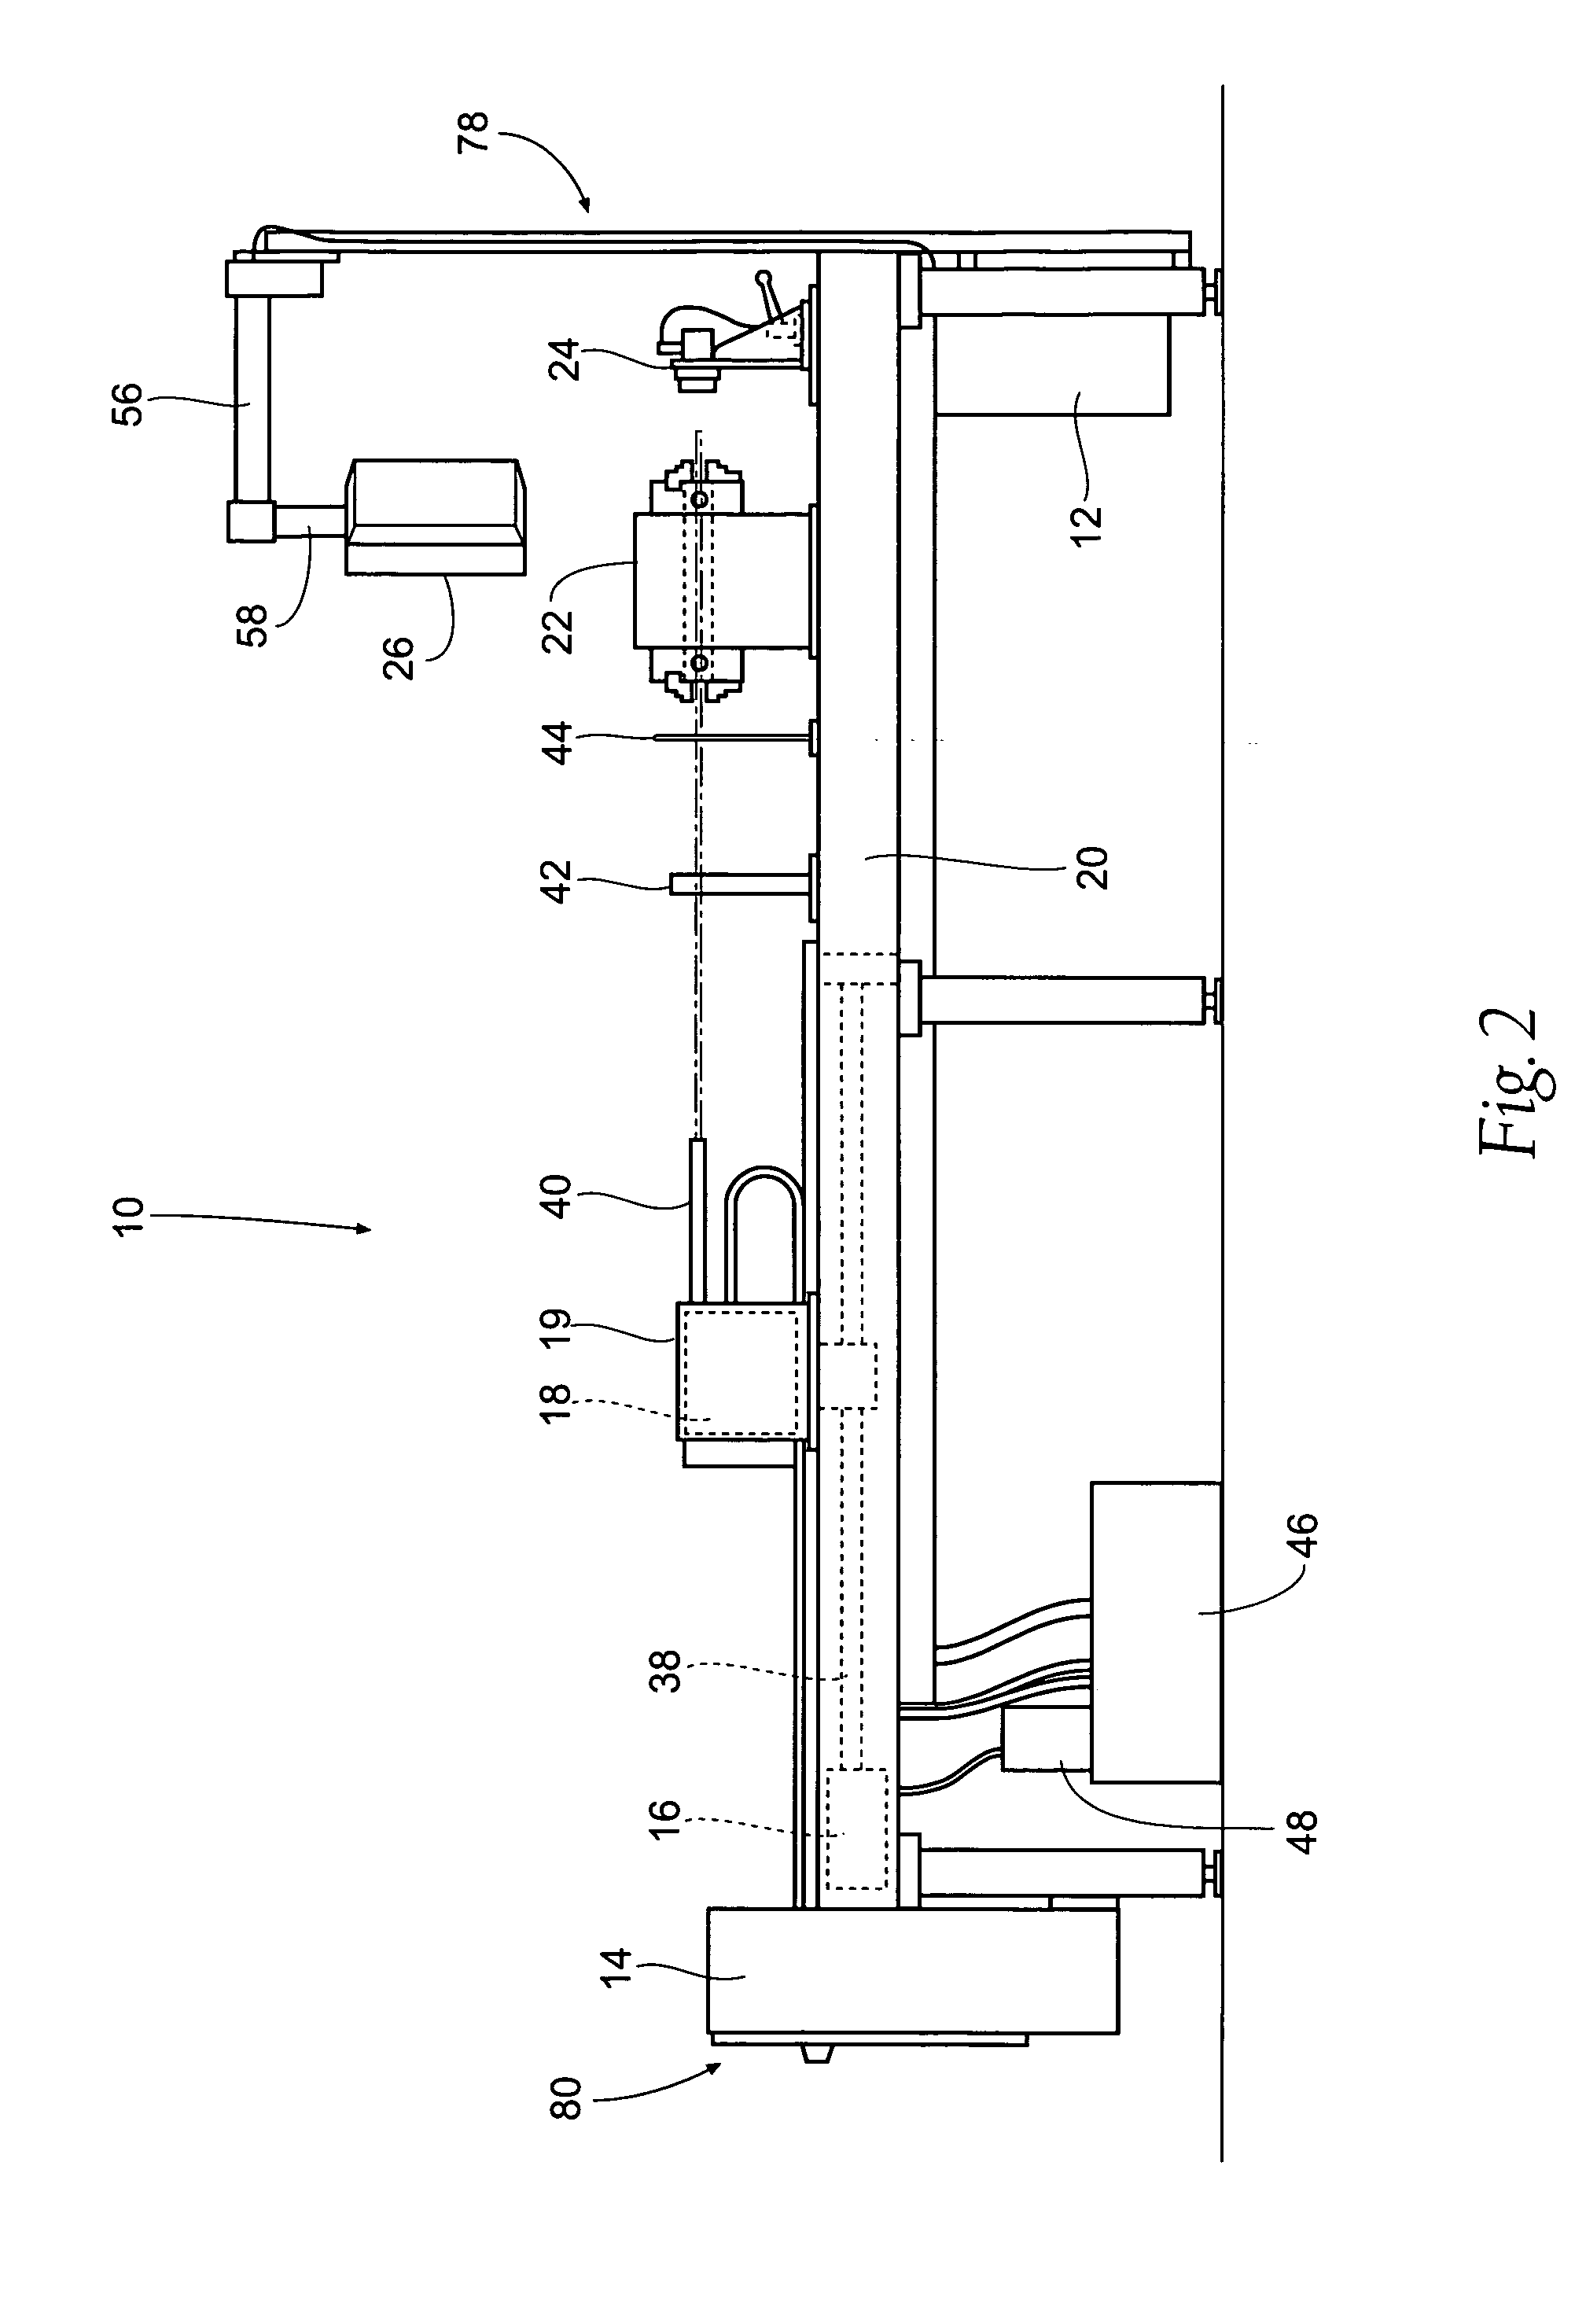 Method and apparatus for rifling a firearm barrel